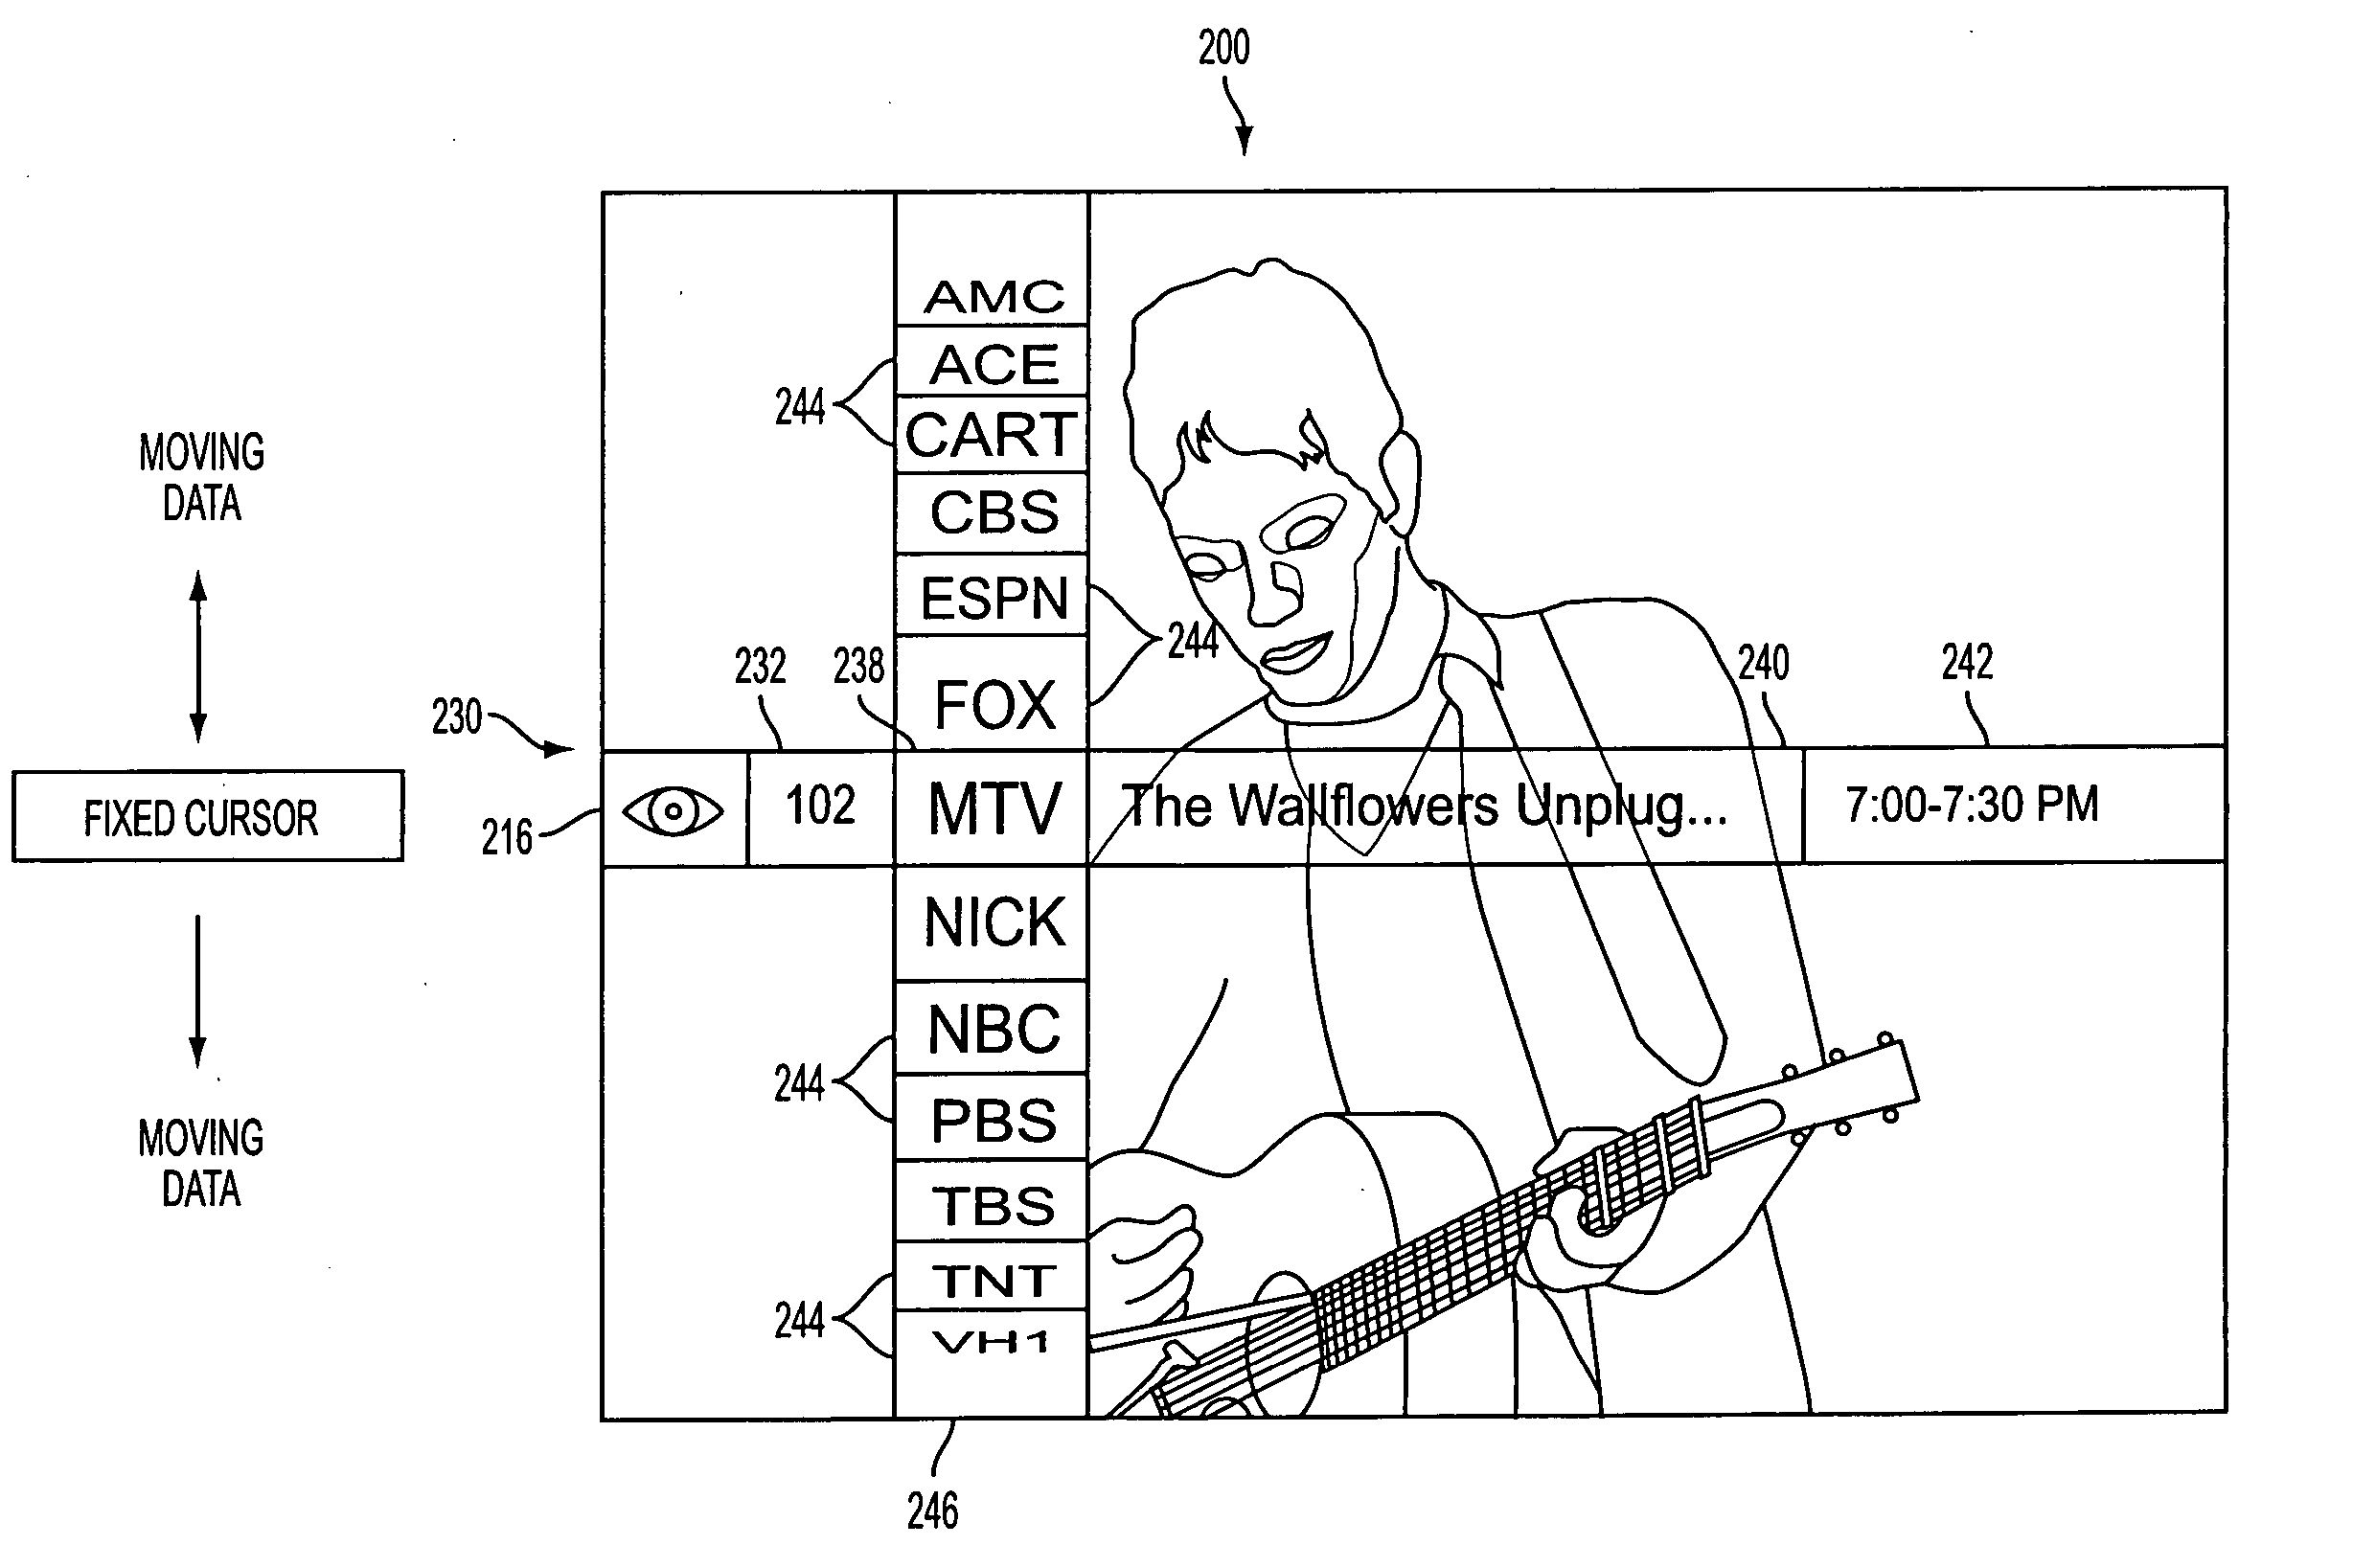 Modal display, smooth scroll graphic user interface and remote command device suitable for efficient navigation and selection of dynamic data/options presented within an audio/visual system